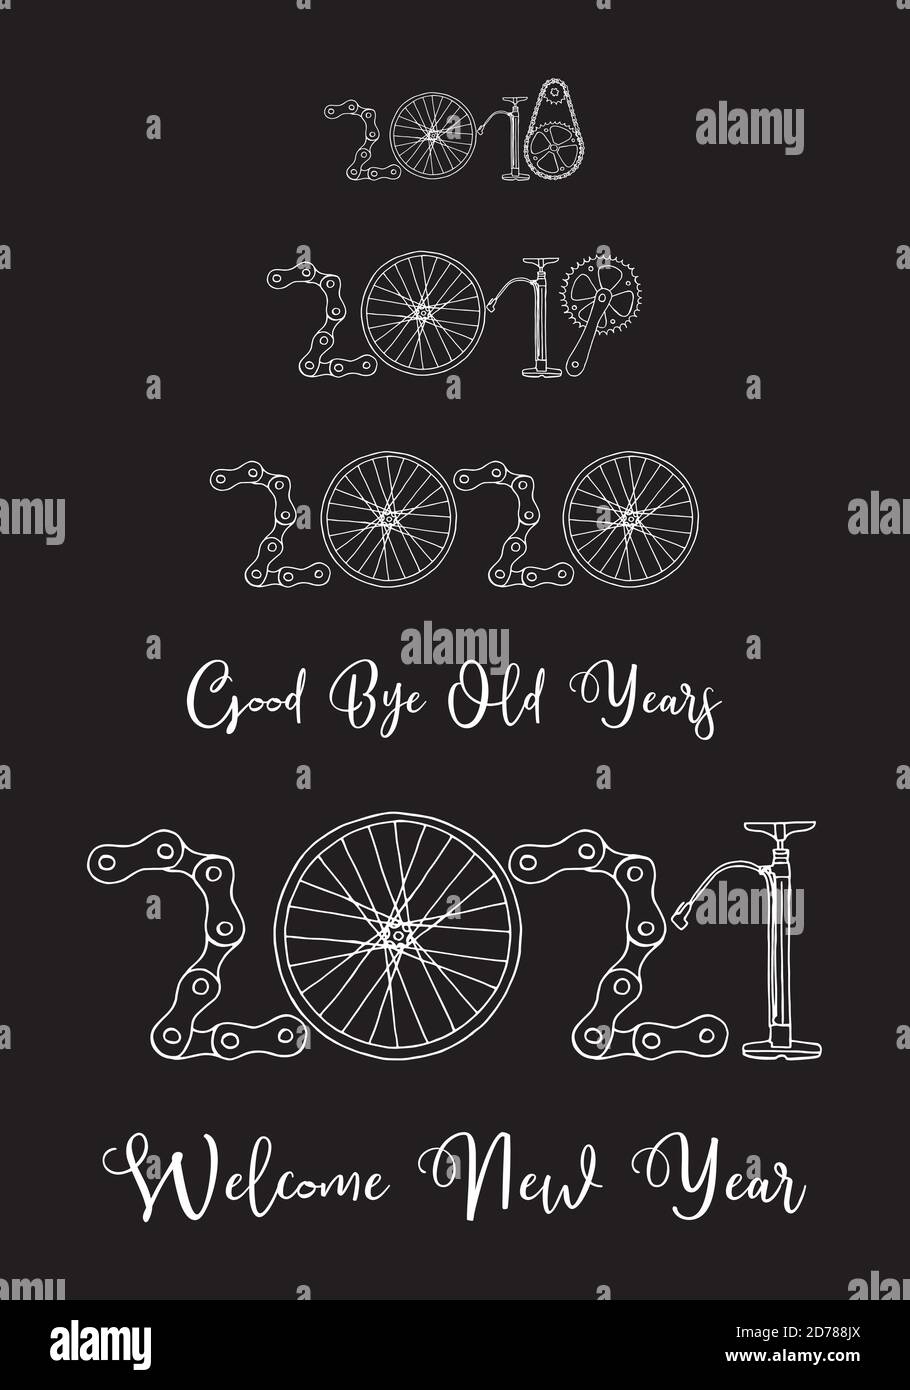 2021 Bicycle Happy New Year welcome vector card illustration on black background Stock Vector